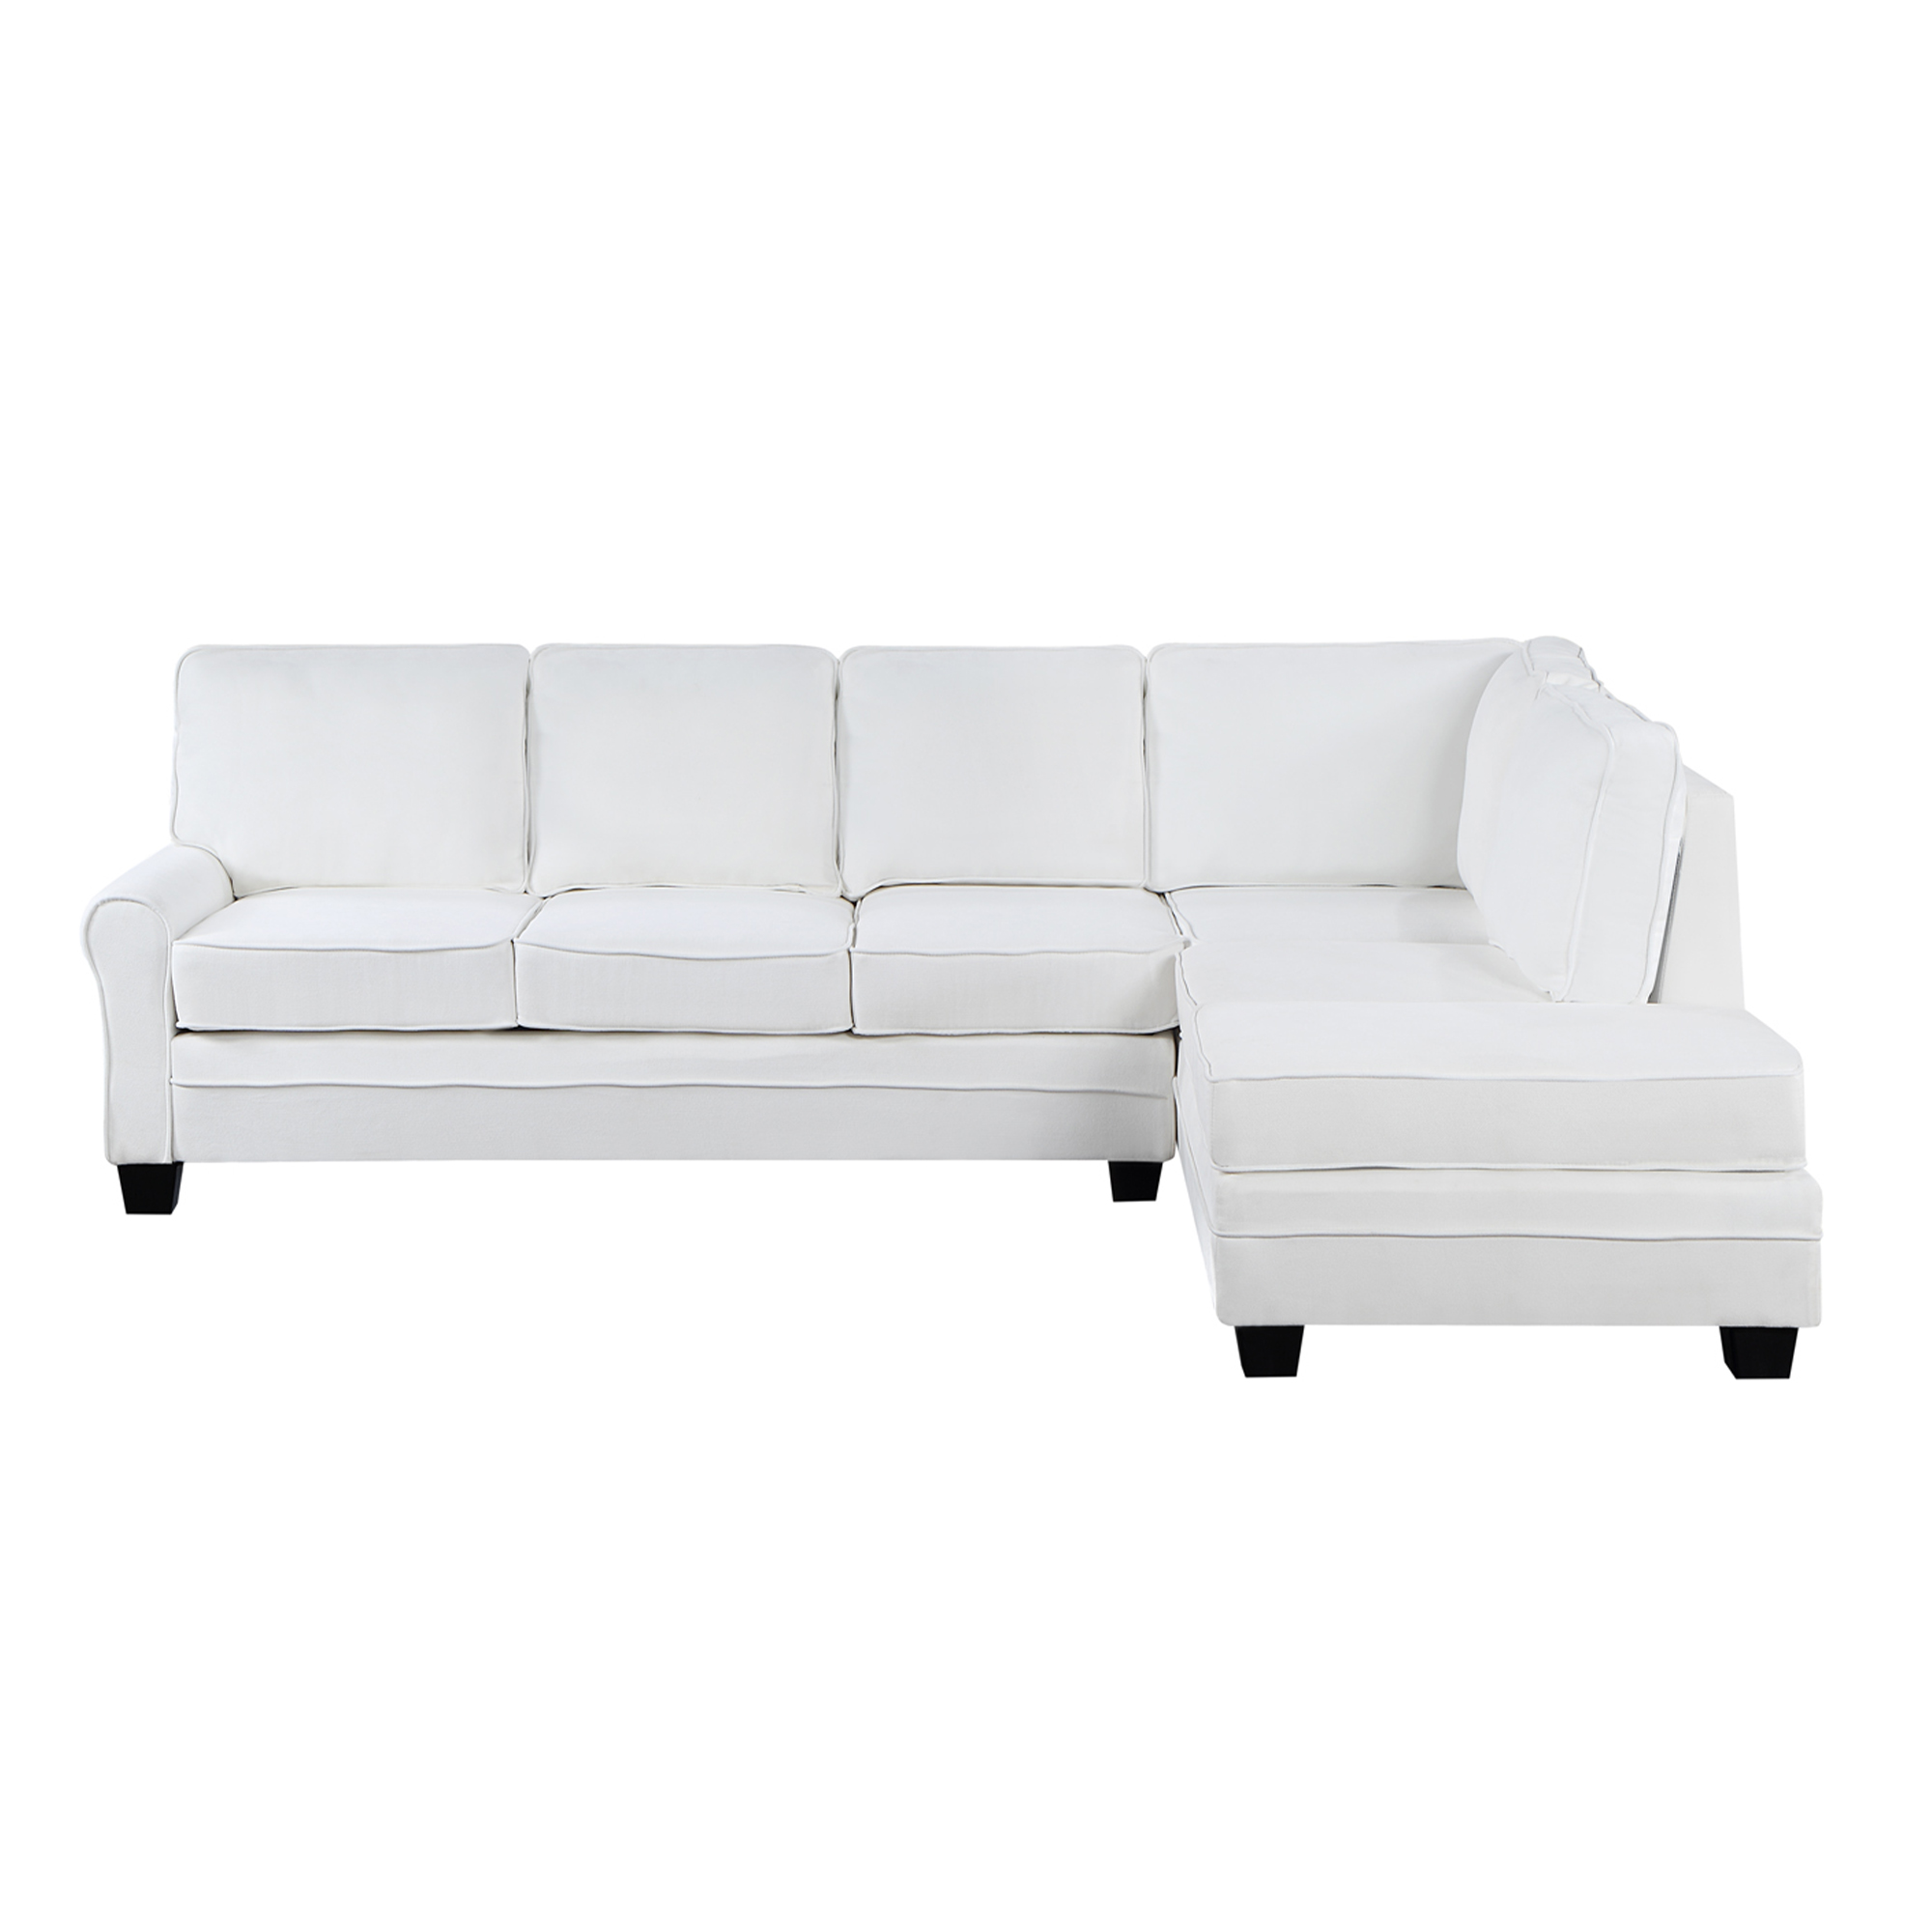 Orisfur. Reversible Sectional Sofa, Modern Linen Upholstered Sofa Couch with Scrolled Arm for Living Room Space-CASAINC